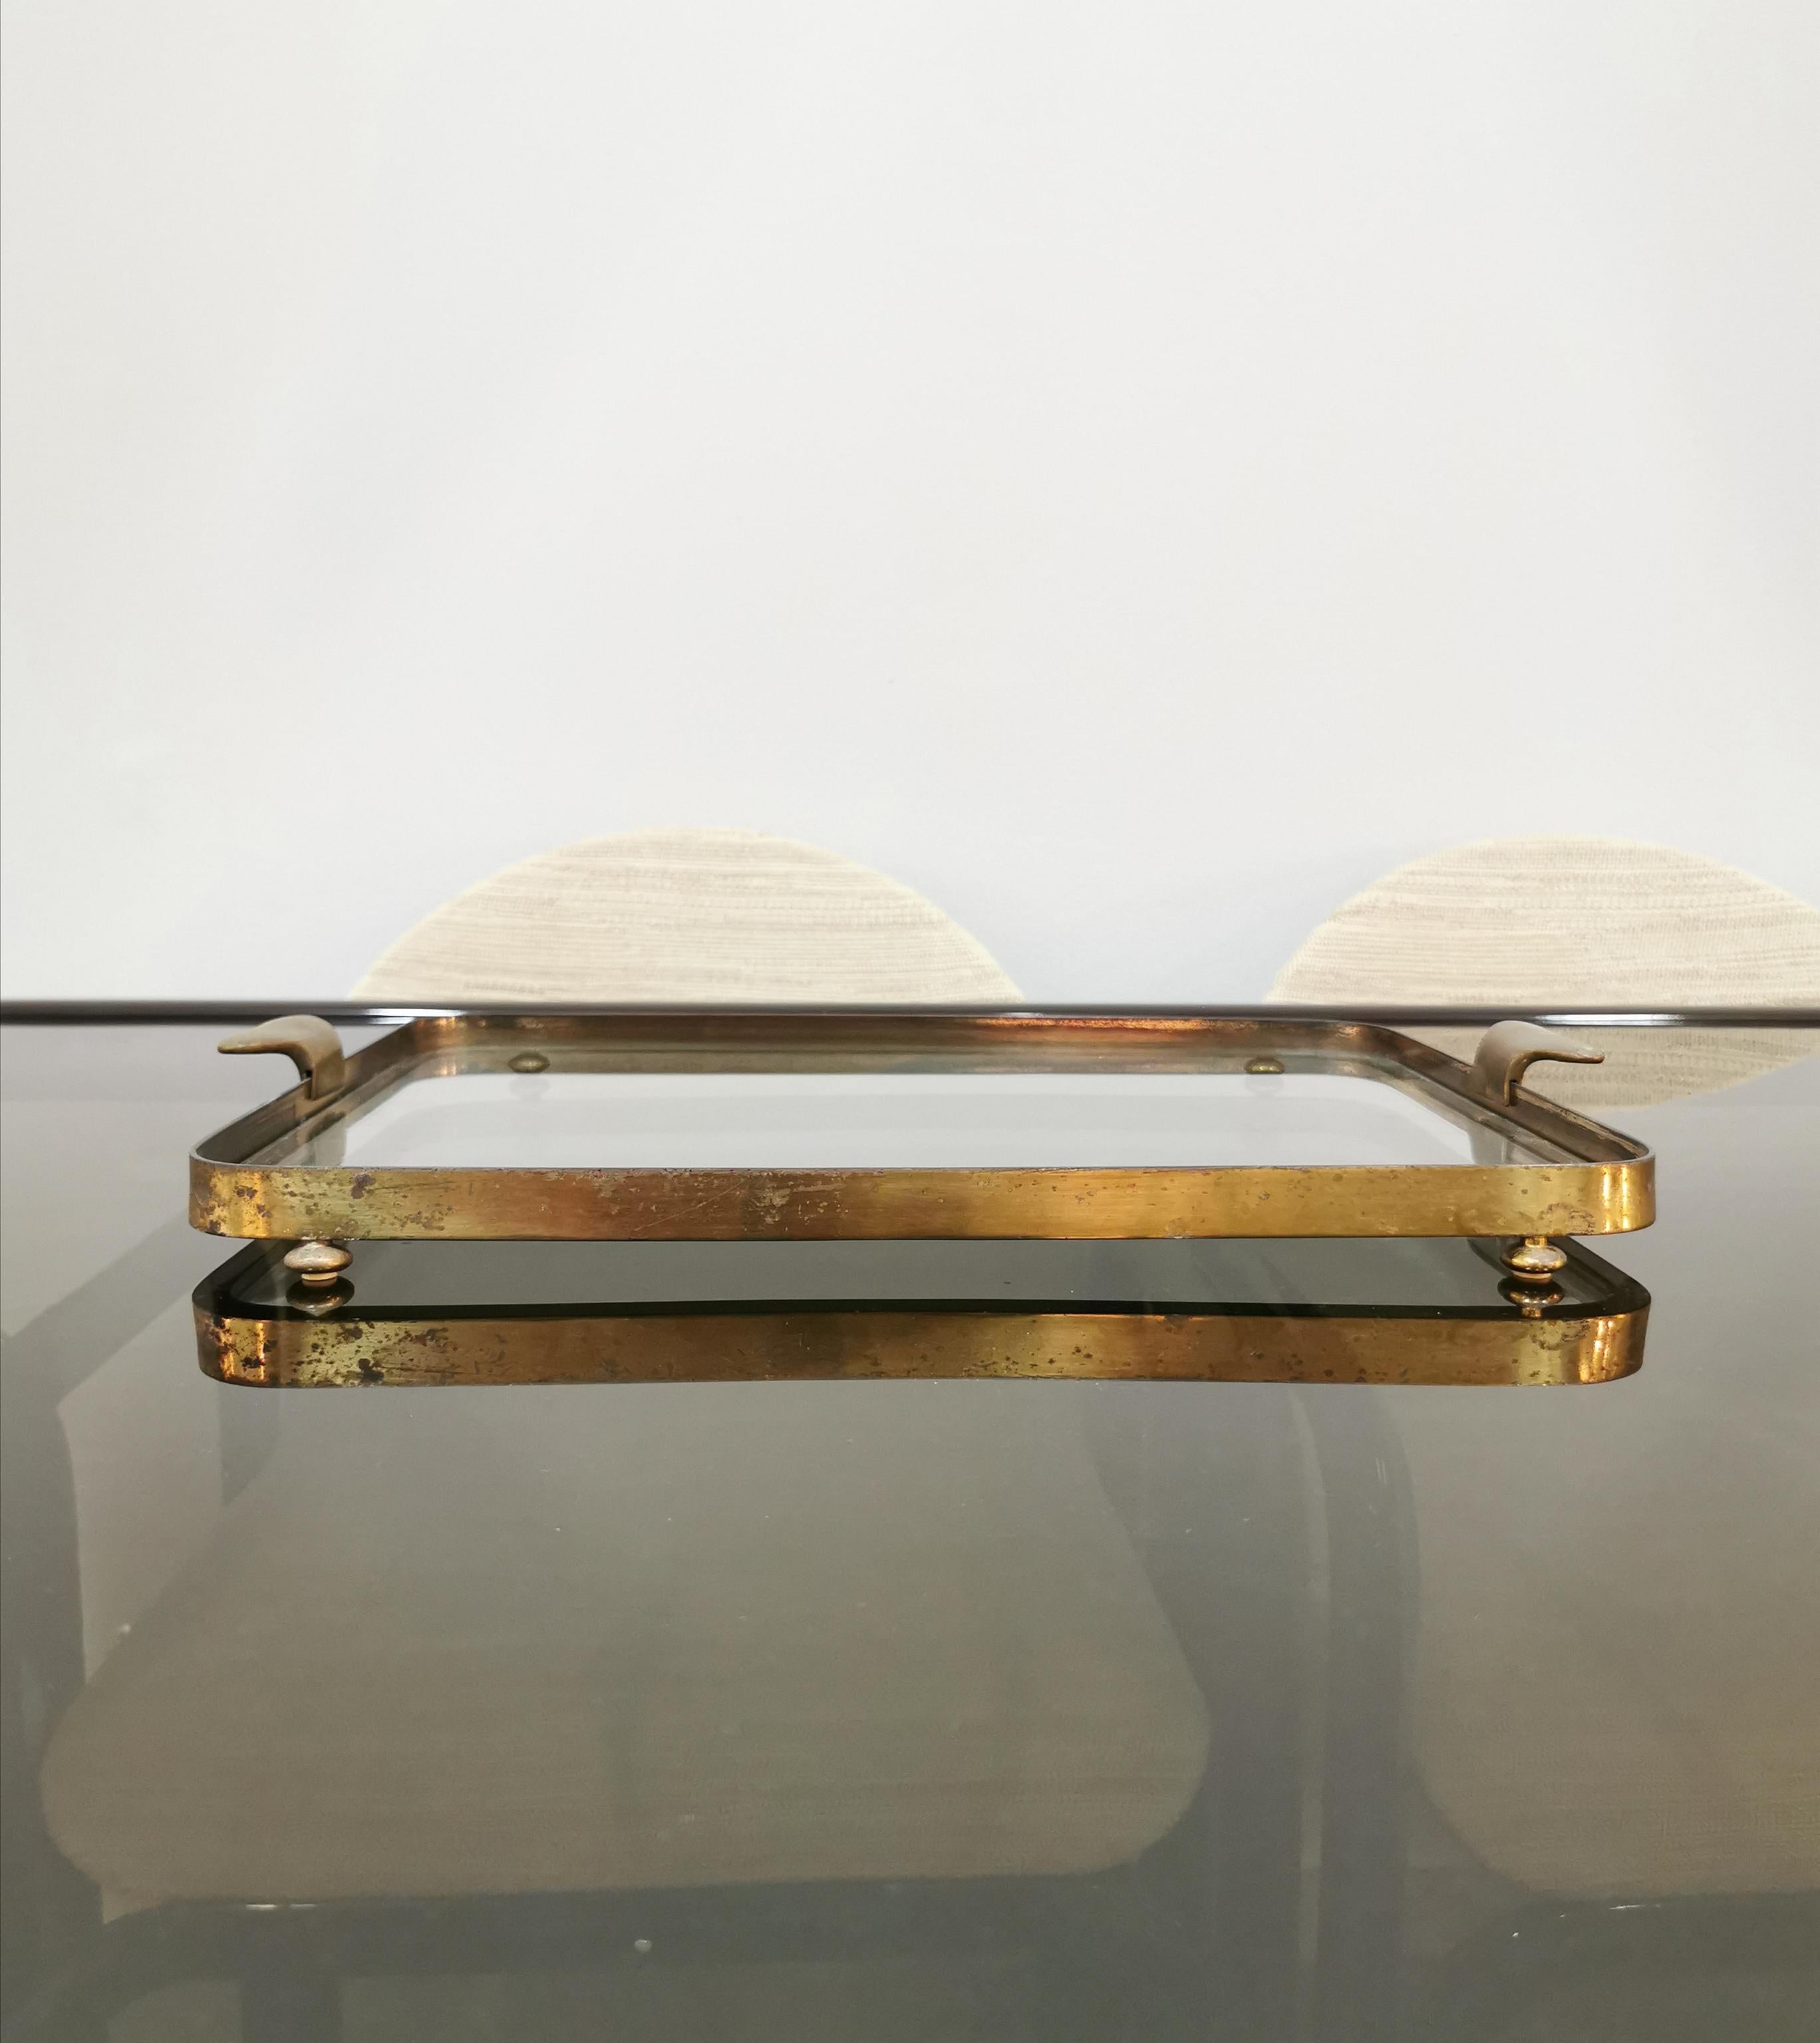 Elegant serving tray in brass, with handles, 4 supporting feet and glass. Italian production of the 1950s.